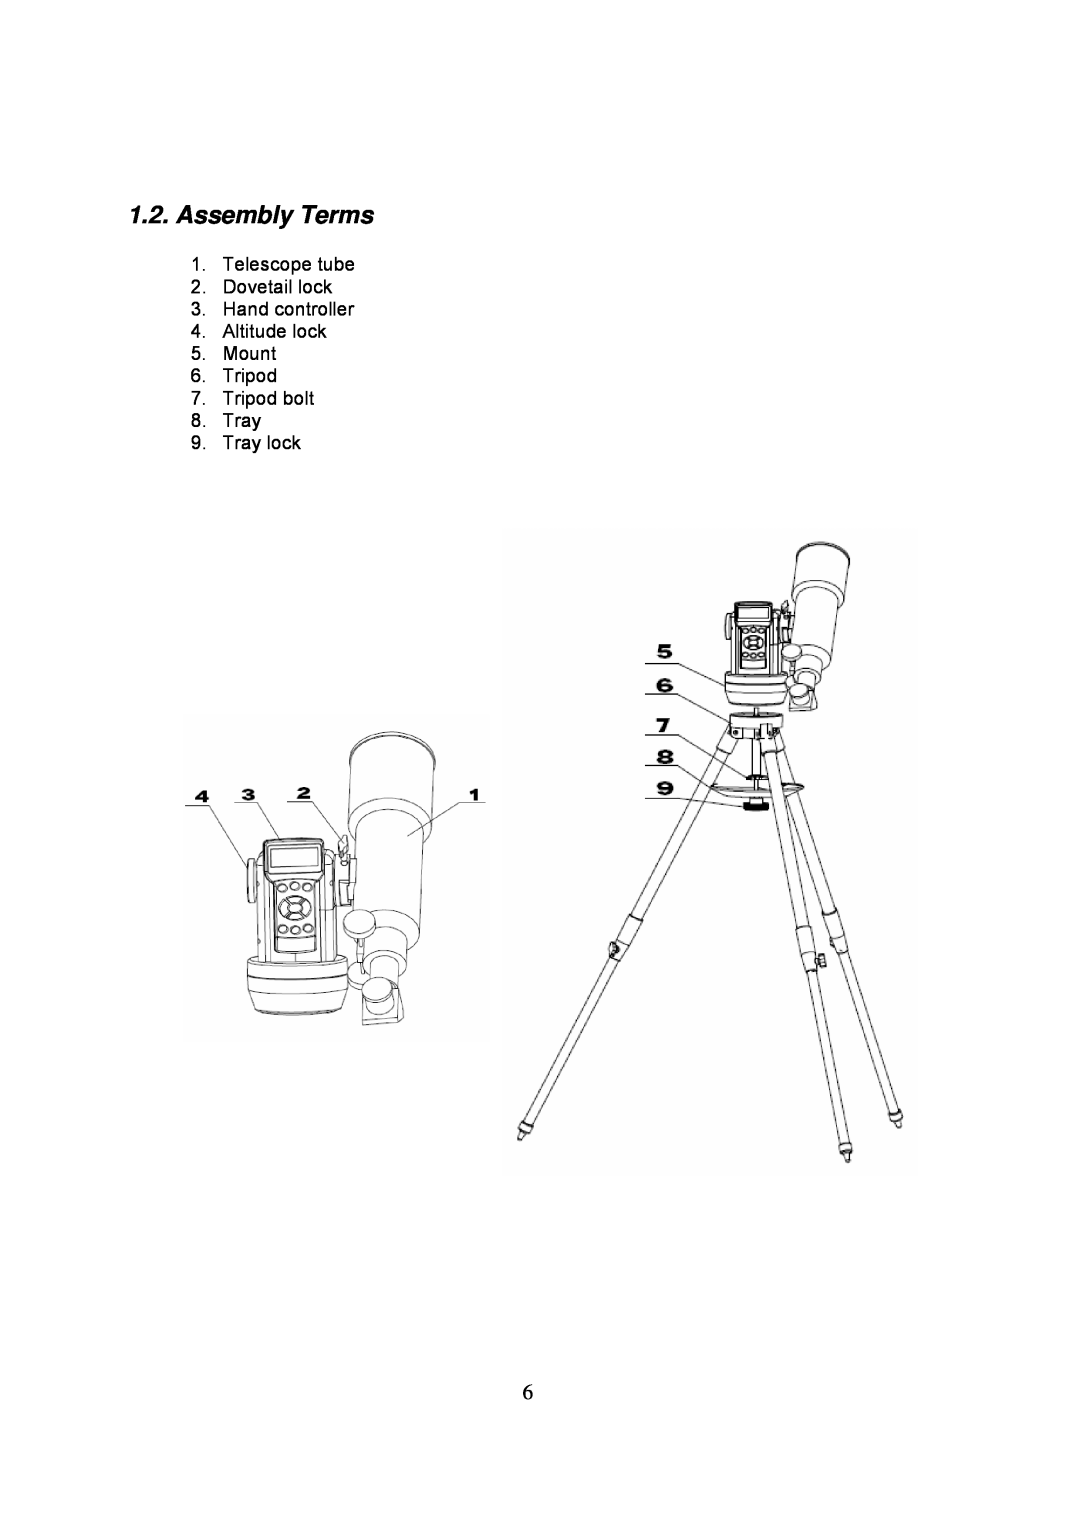 iOptron 8502, 8503, 8504, 8500 Assembly Terms, Telescope tube 2.Dovetail lock, Hand controller 4.Altitude lock 5.Mount 